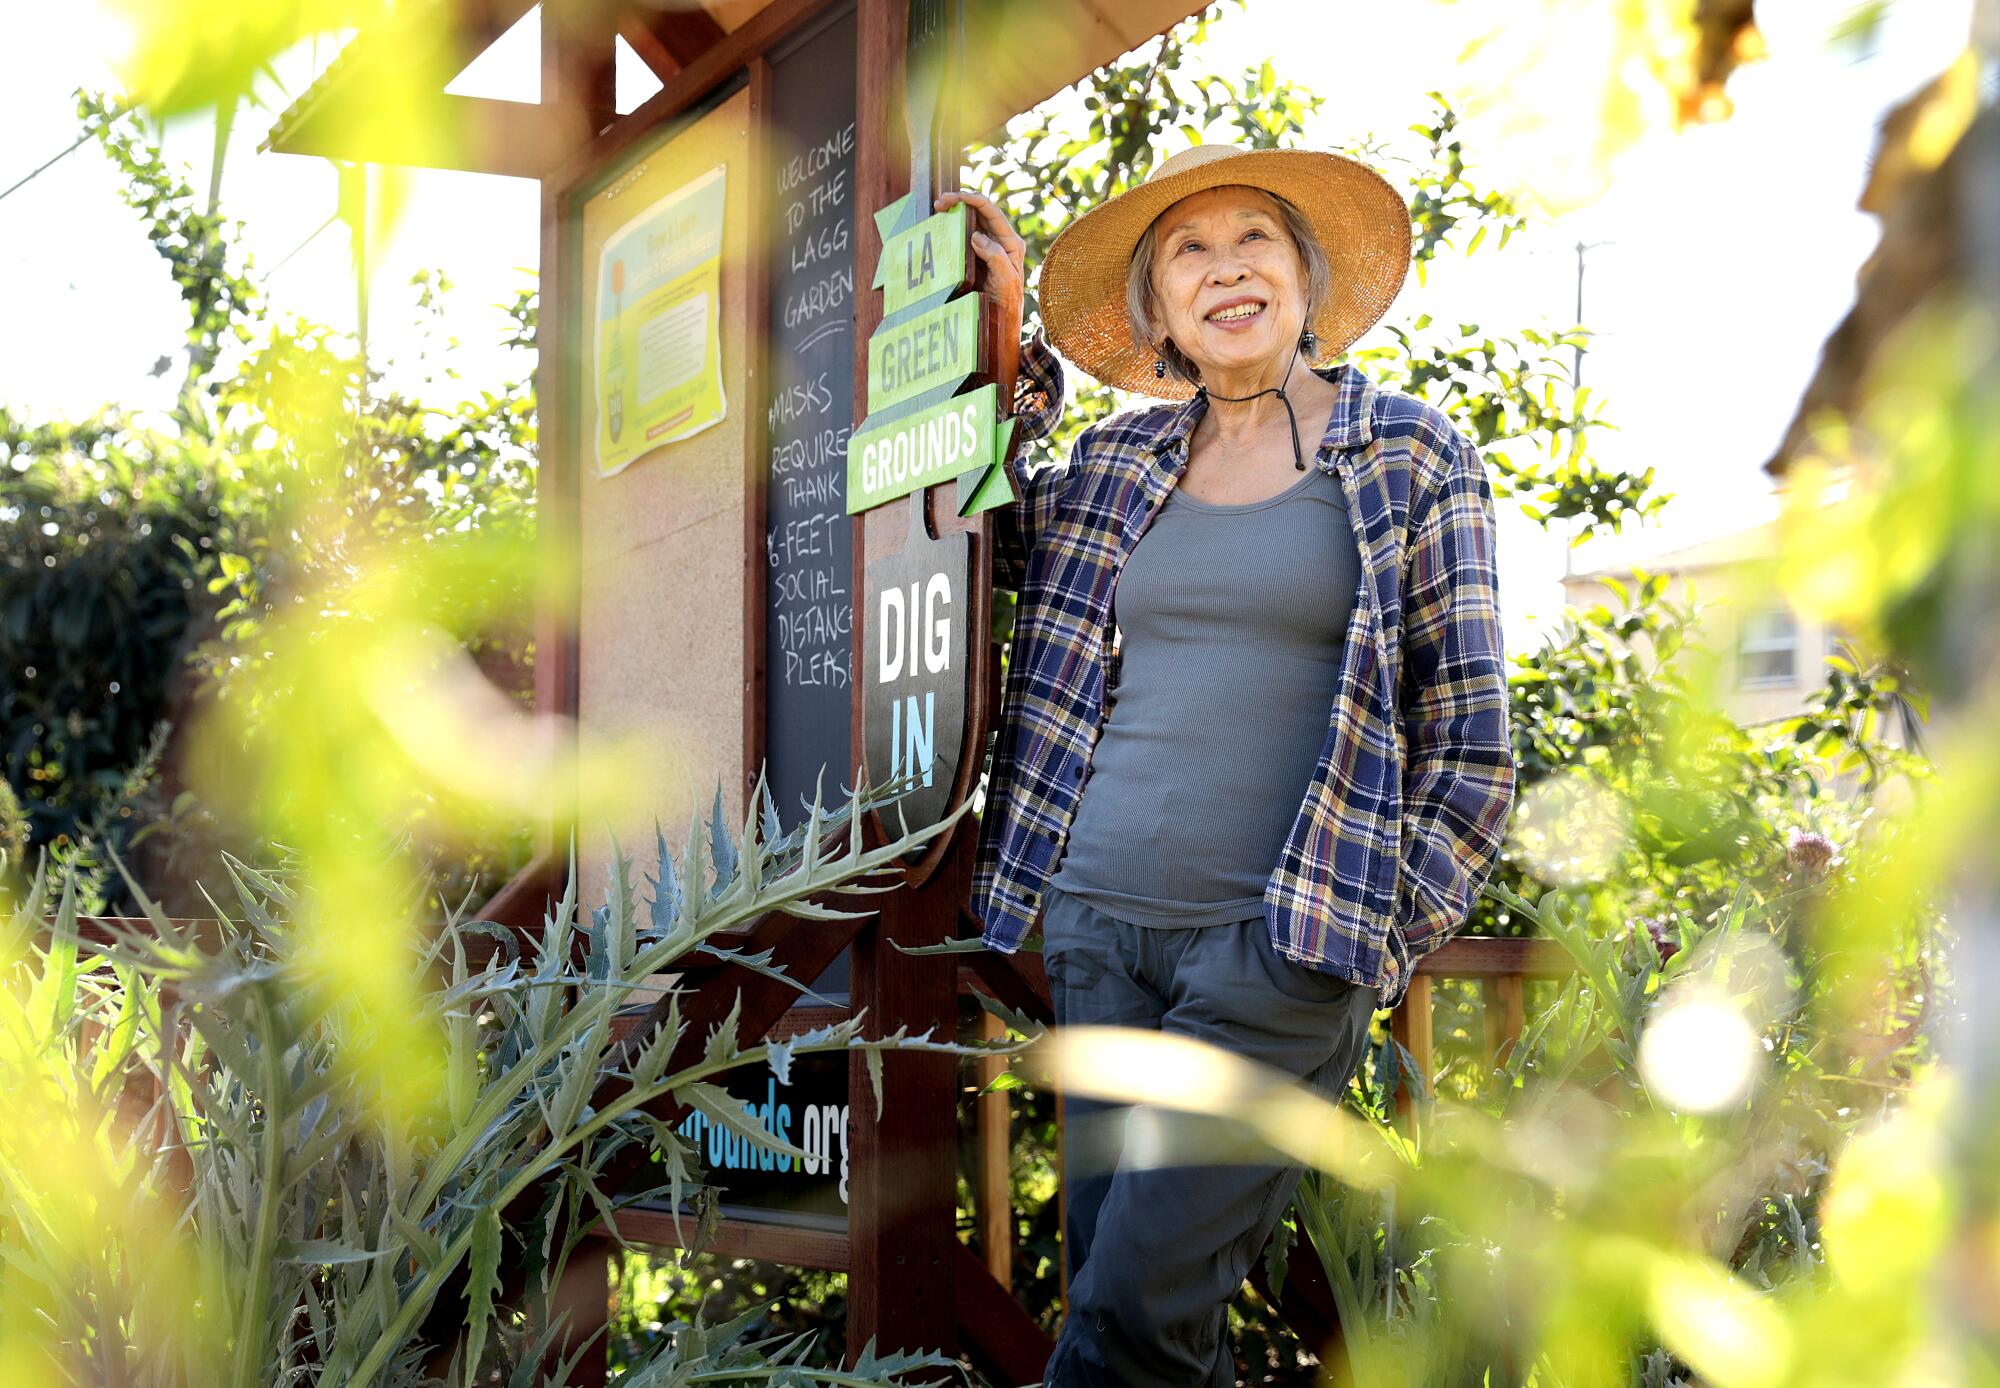 Florence Nishida wears a straw hat at L.A. Green Grounds Garden.